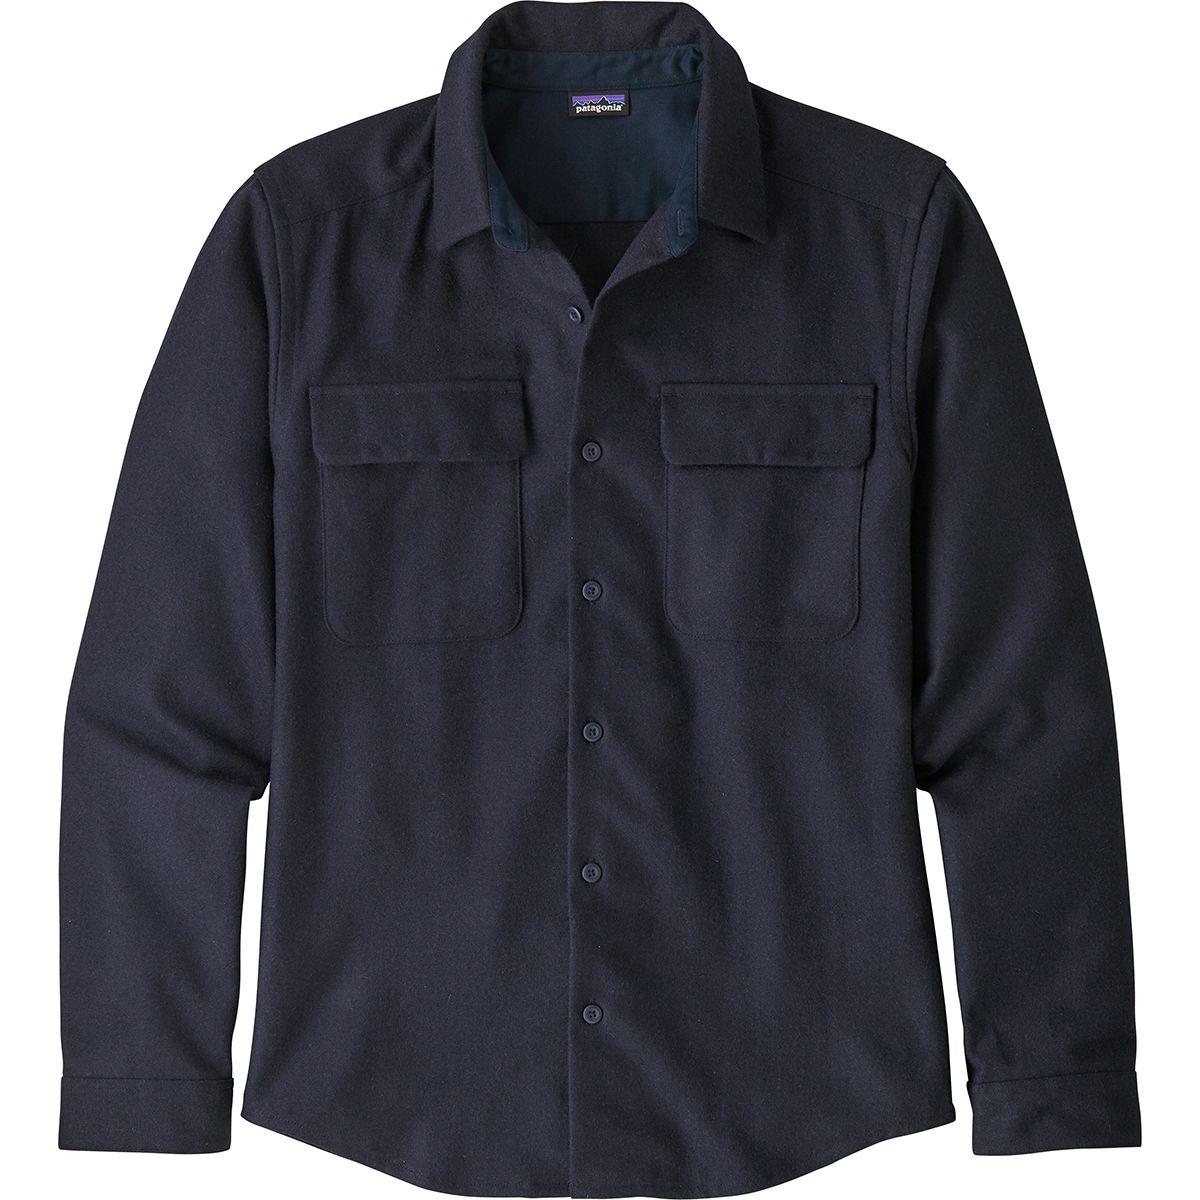 Patagonia Recycled Wool Shirt in Blue for Men - Lyst